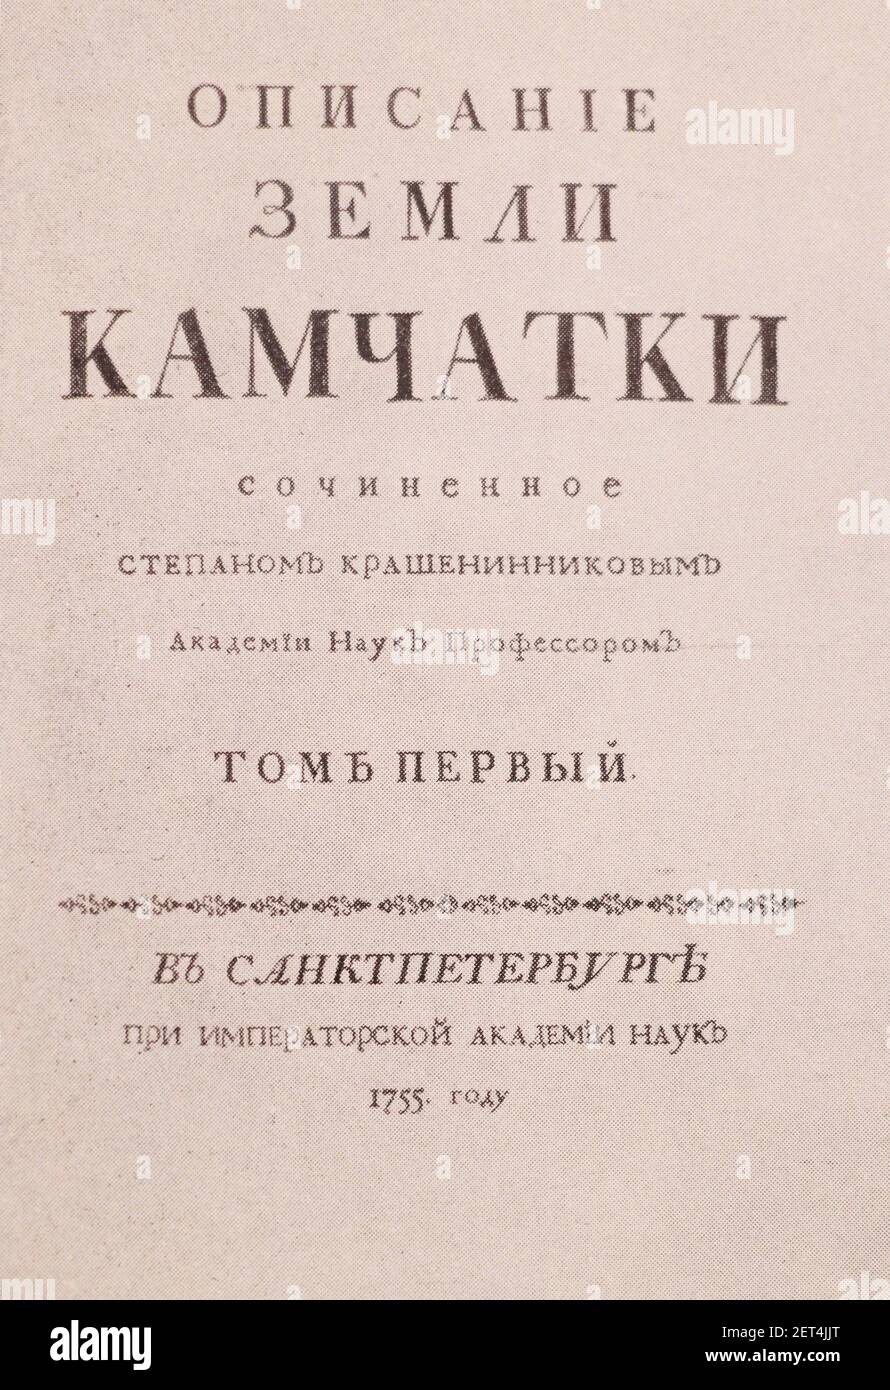 The title page of Stepan Krasheninnikov's book 'Description of the Land of Kamchatka' published in 1755. Stock Photo